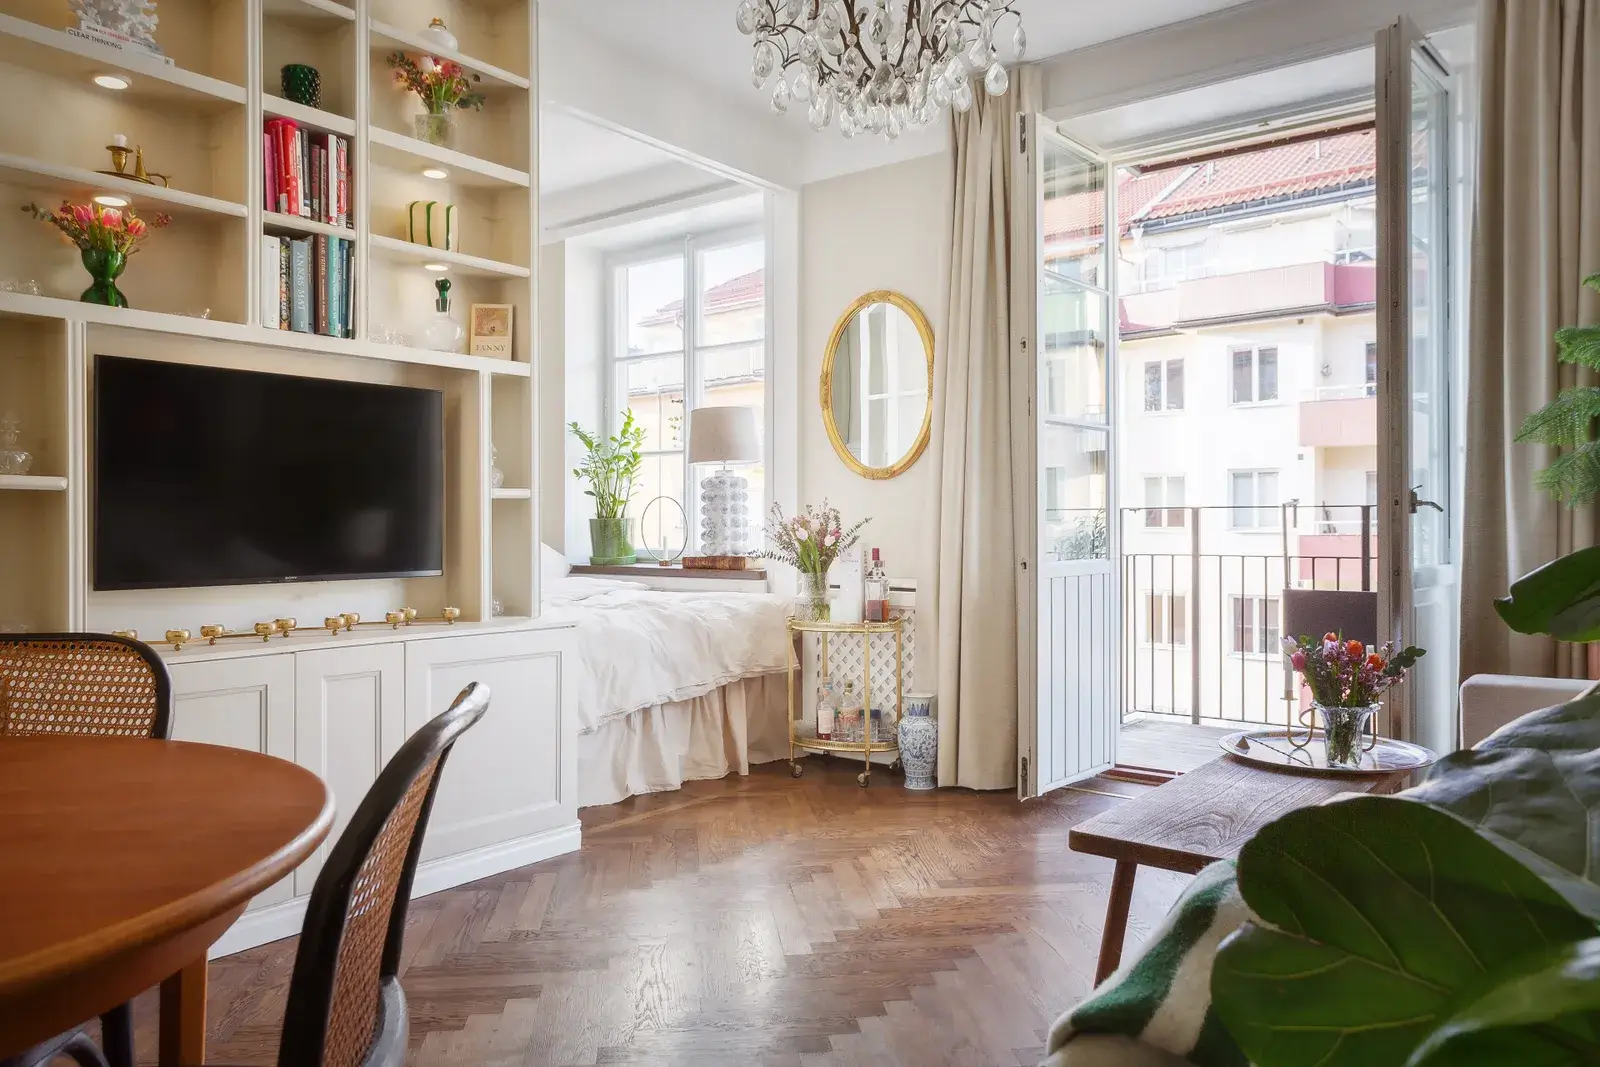 A Swedish Studio Apartment Decorated in a Classic Style